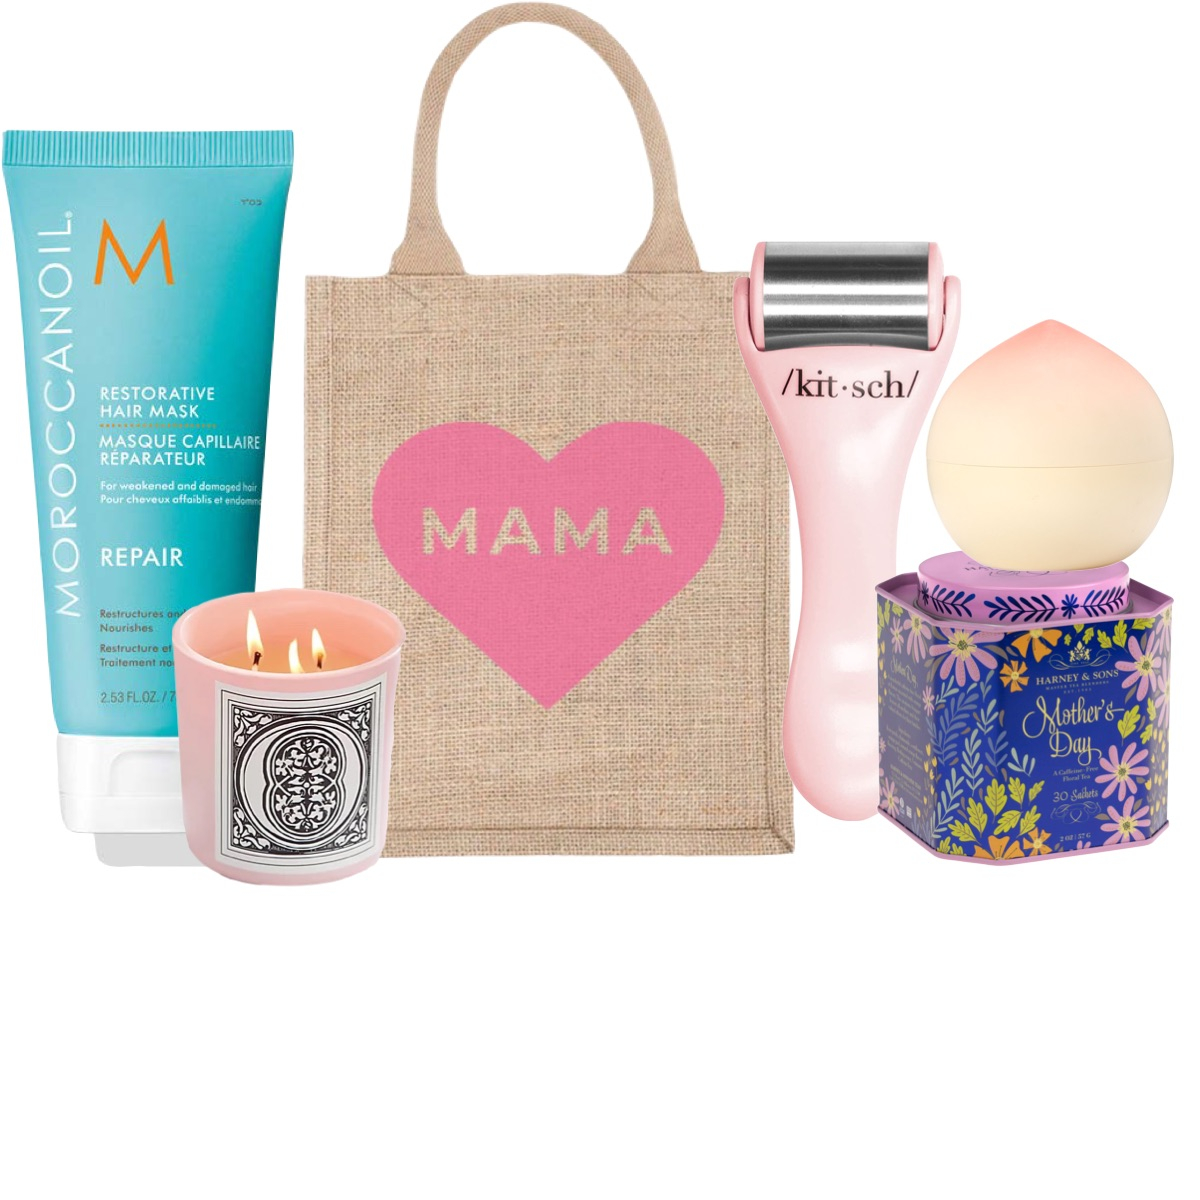 20 best Mother's Day gifts under $20 - Affordable gift ideas for mom -  Reviewed